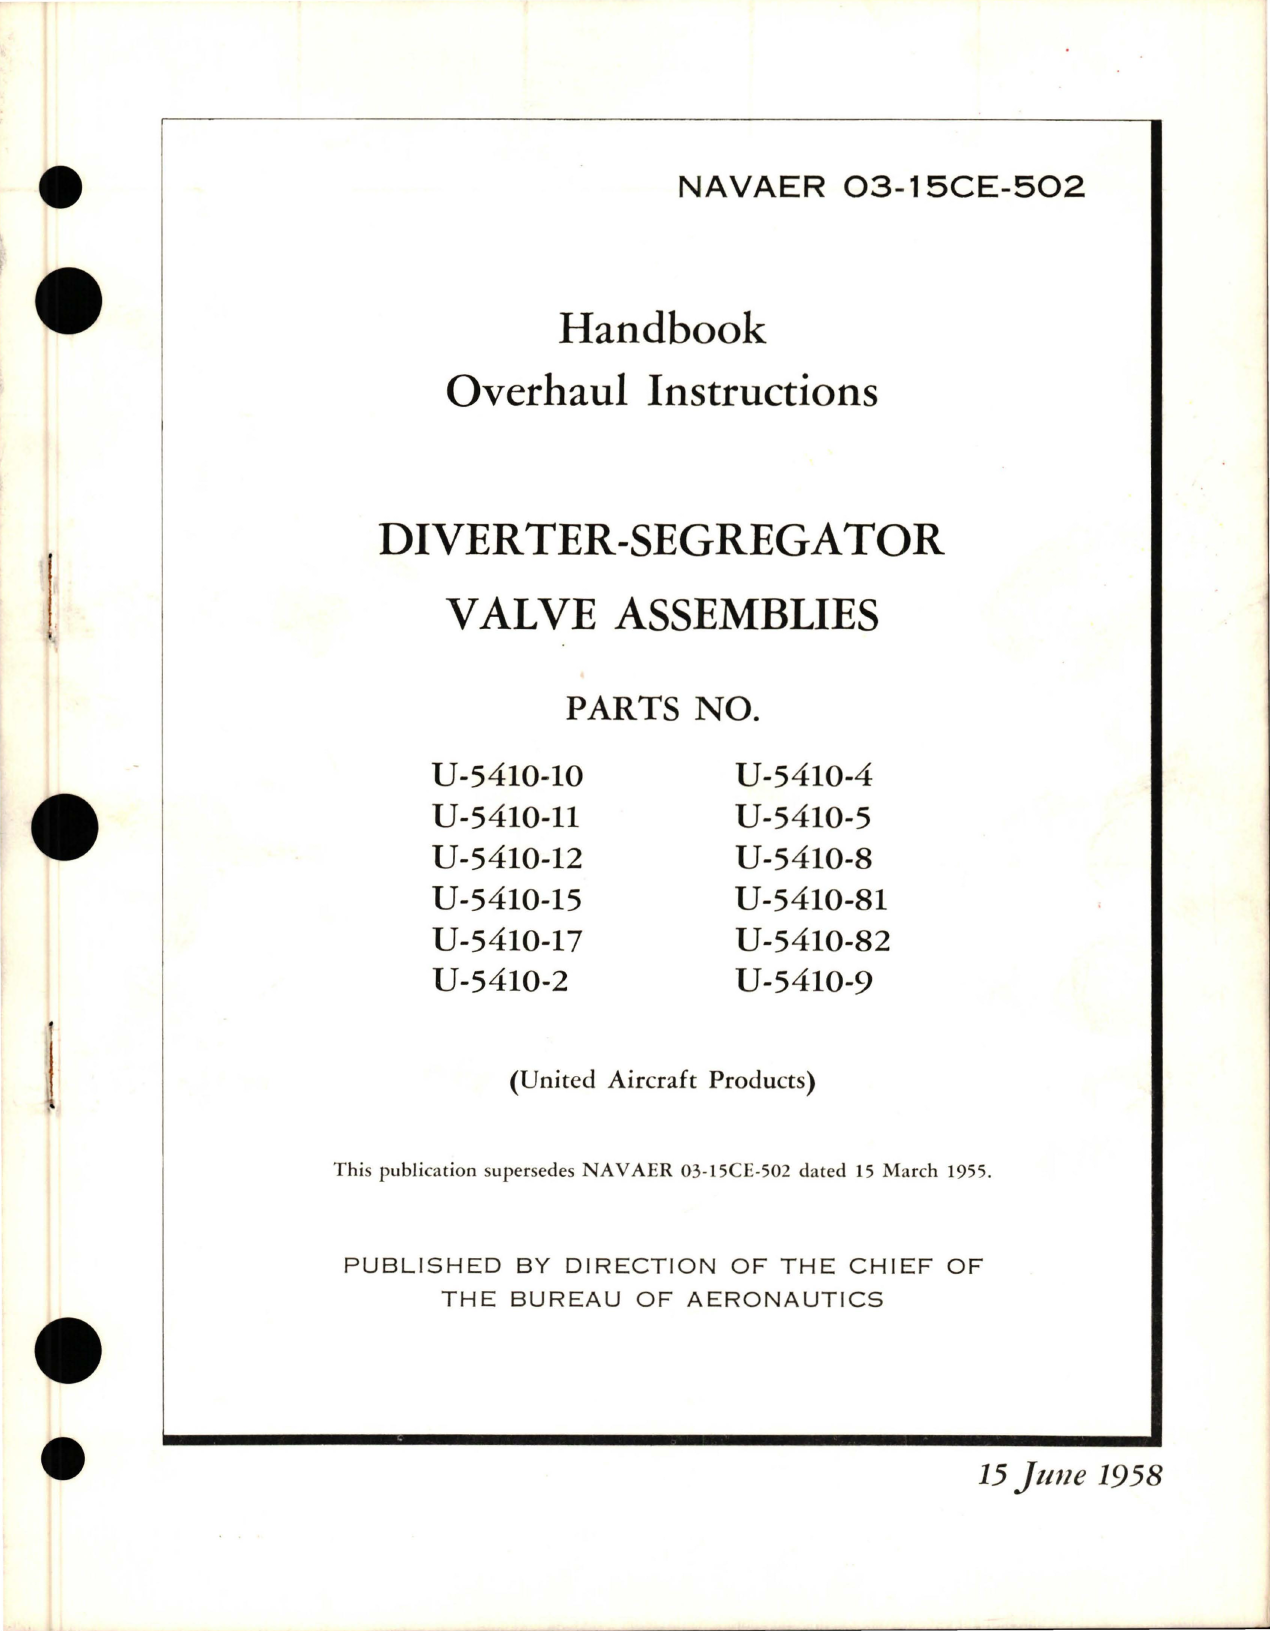 Sample page 1 from AirCorps Library document: Overhaul Instructions for Diverter Segregator Valve Assemblies